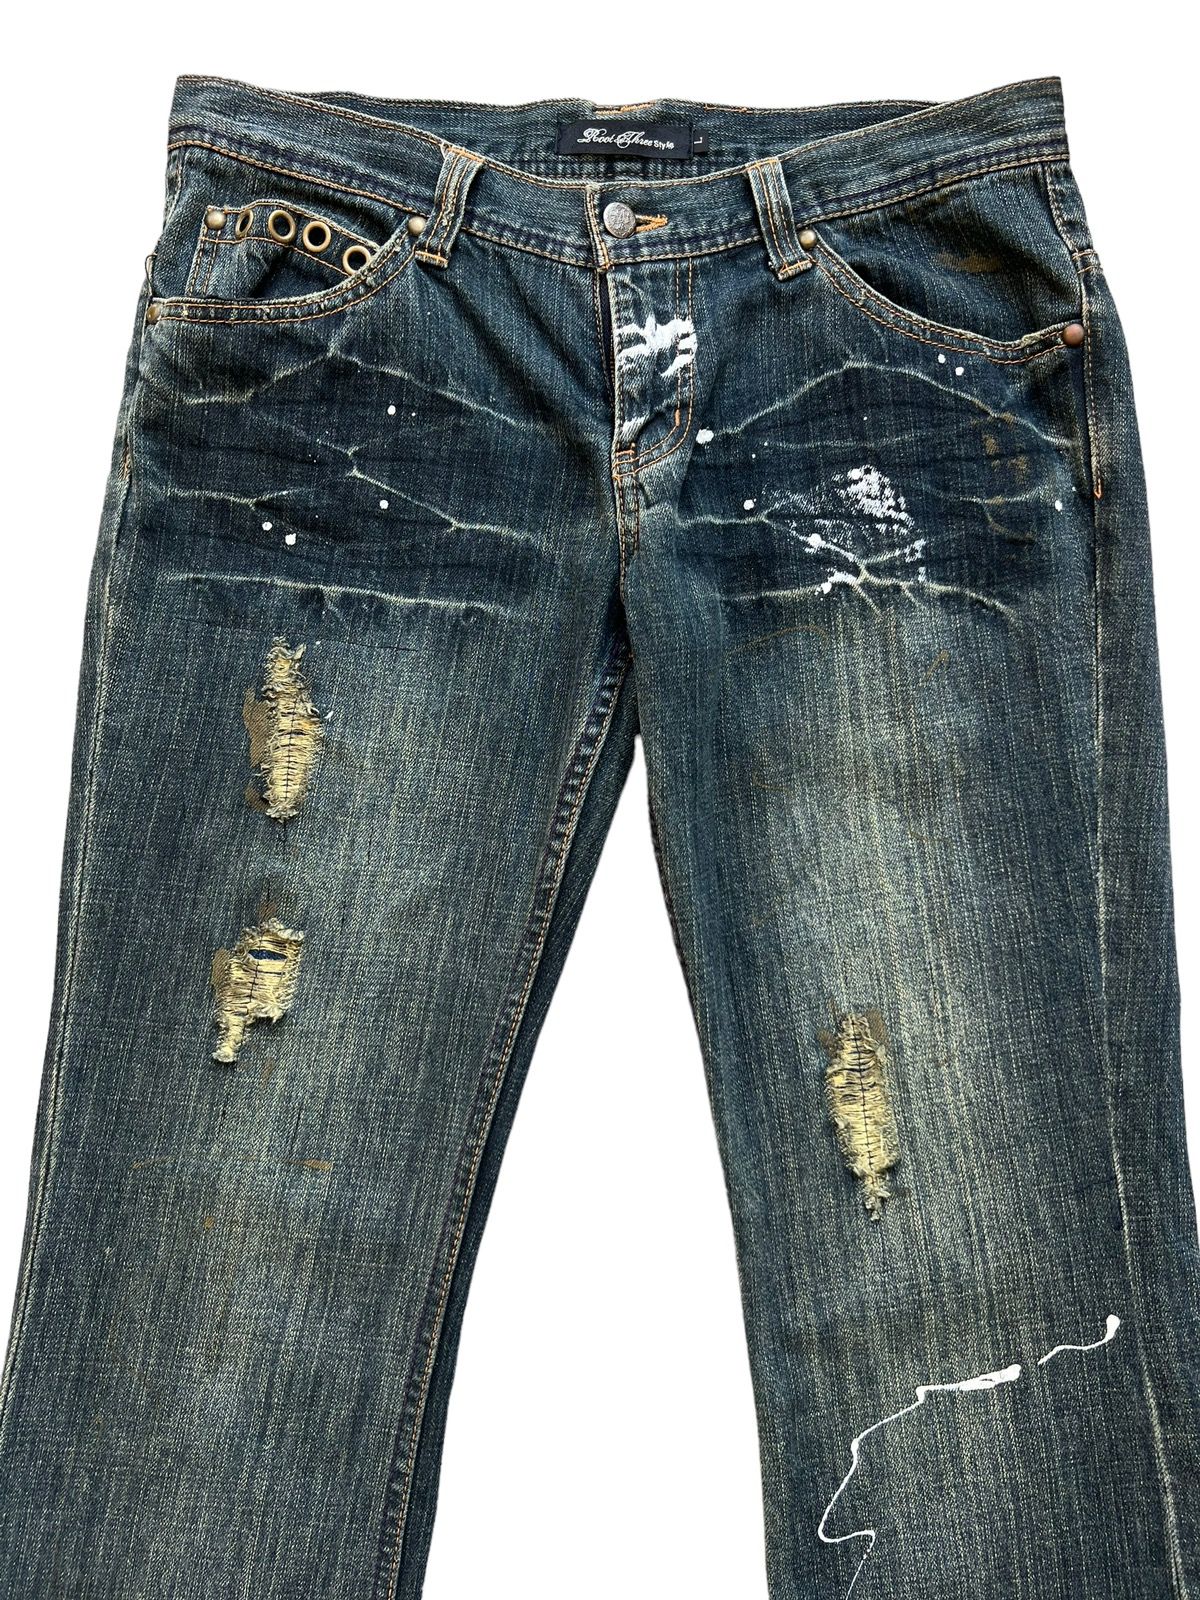 Hype - Roots Japan Distressed Riped Rusty Denim Painted Jeans 33x33 - 4